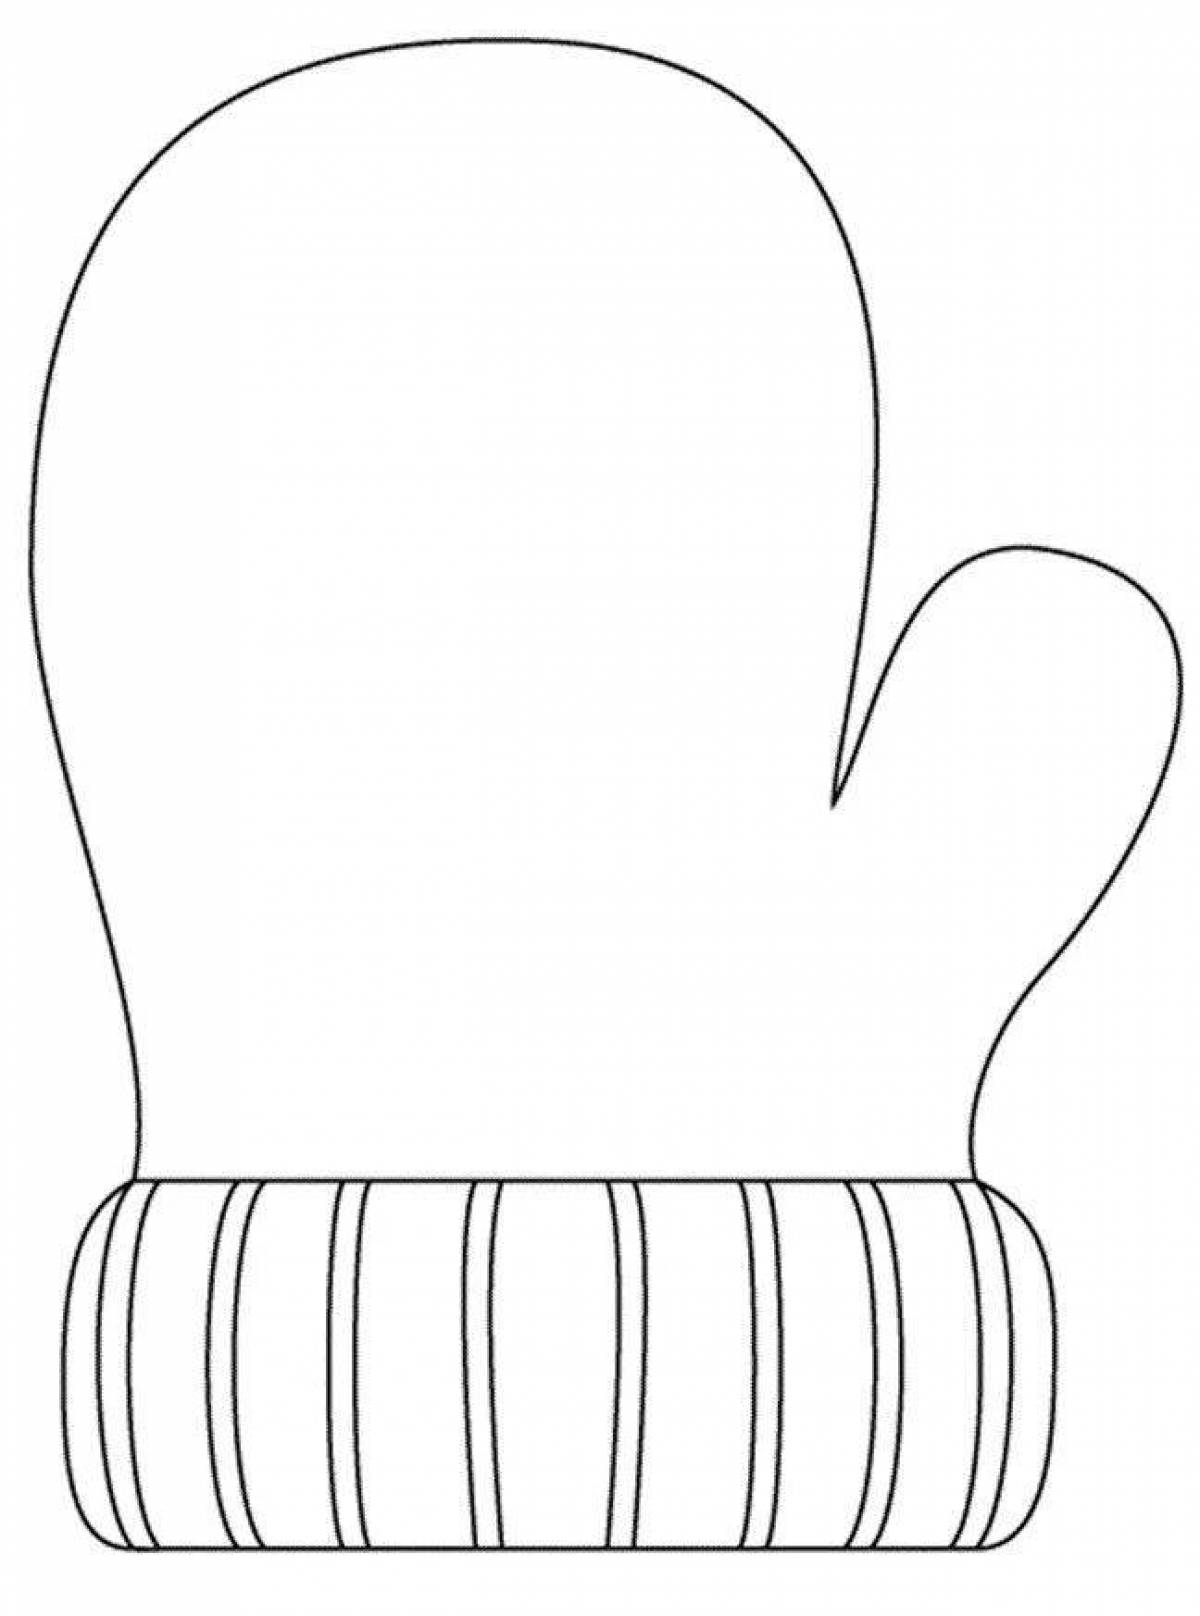 Coloring book with bright pattern of mittens